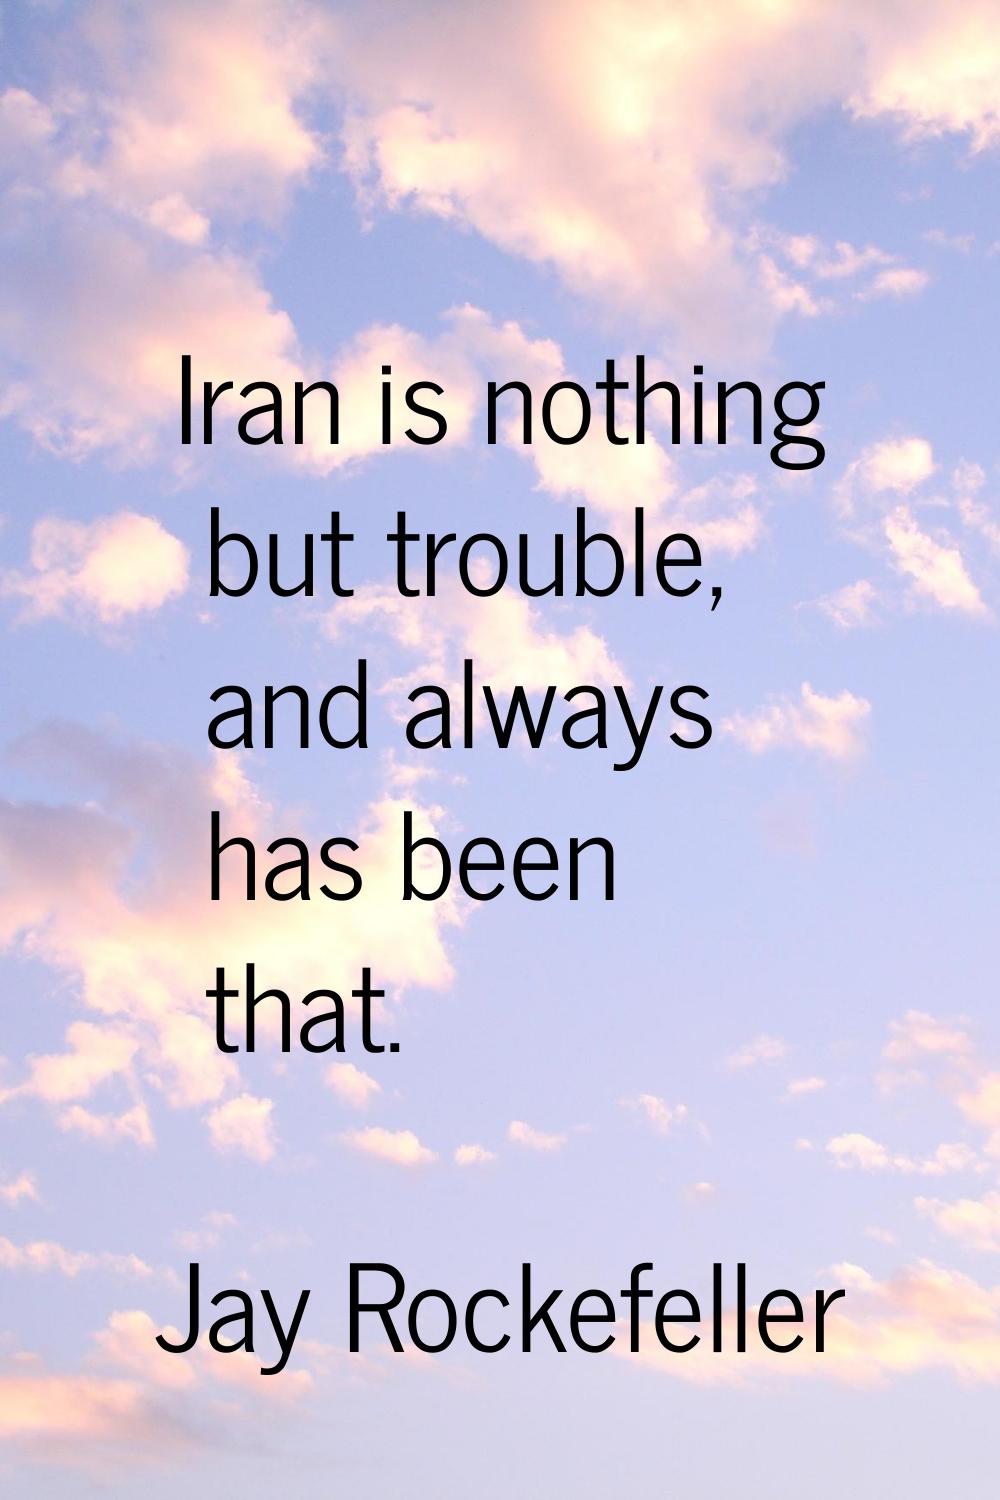 Iran is nothing but trouble, and always has been that.